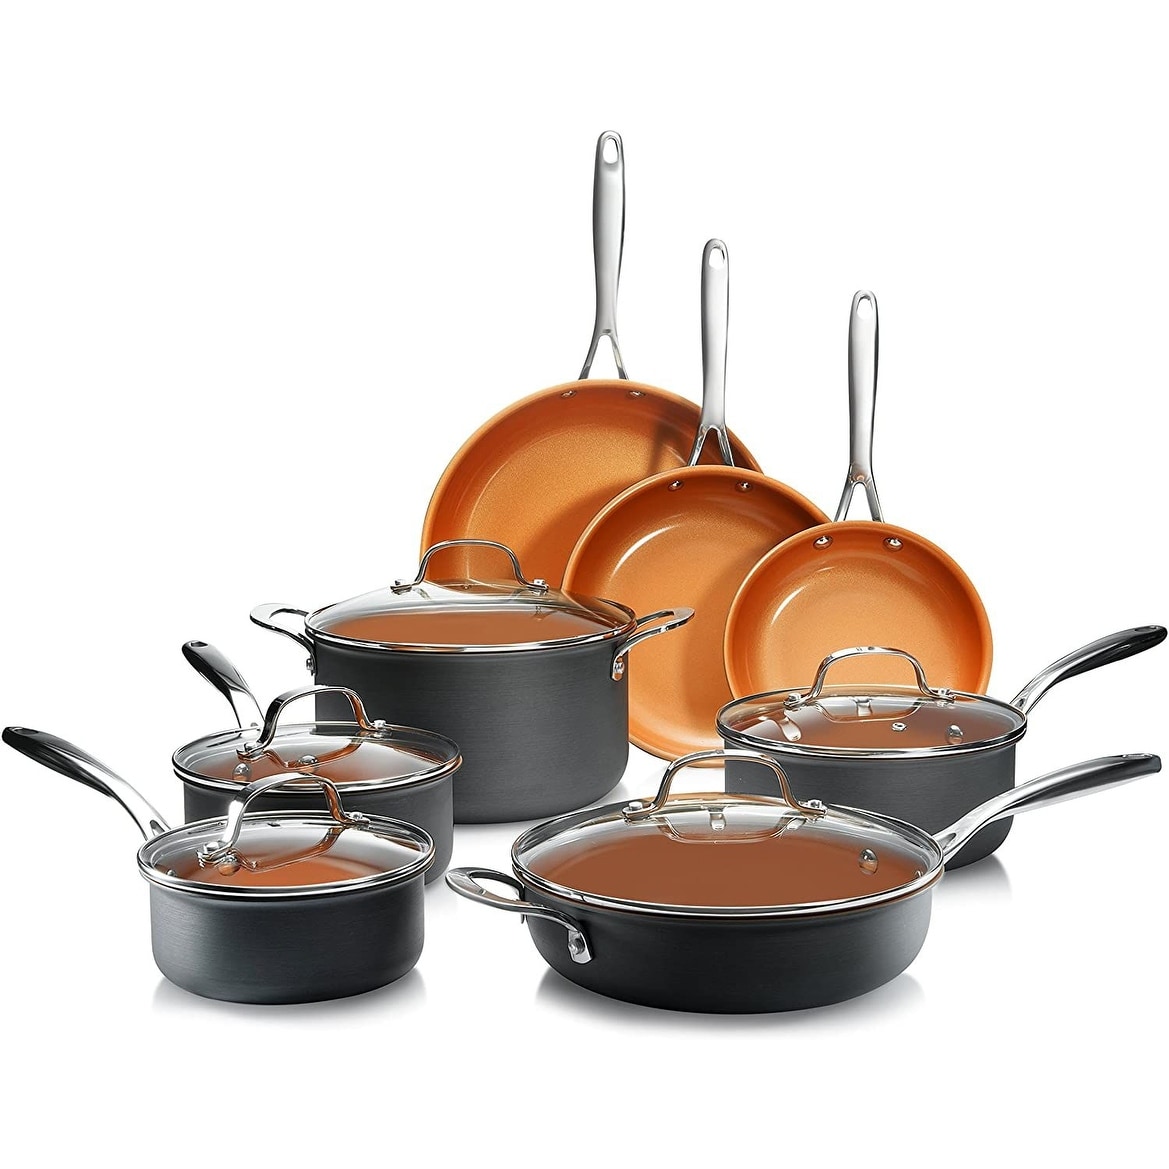 https://ak1.ostkcdn.com/images/products/is/images/direct/32119bf128558925ee15ed071caffa9c7b7c22b5/Gotham-Steel-PRO-Hard-Anodized-13PC-Non-Stick-Cookware-Set.jpg